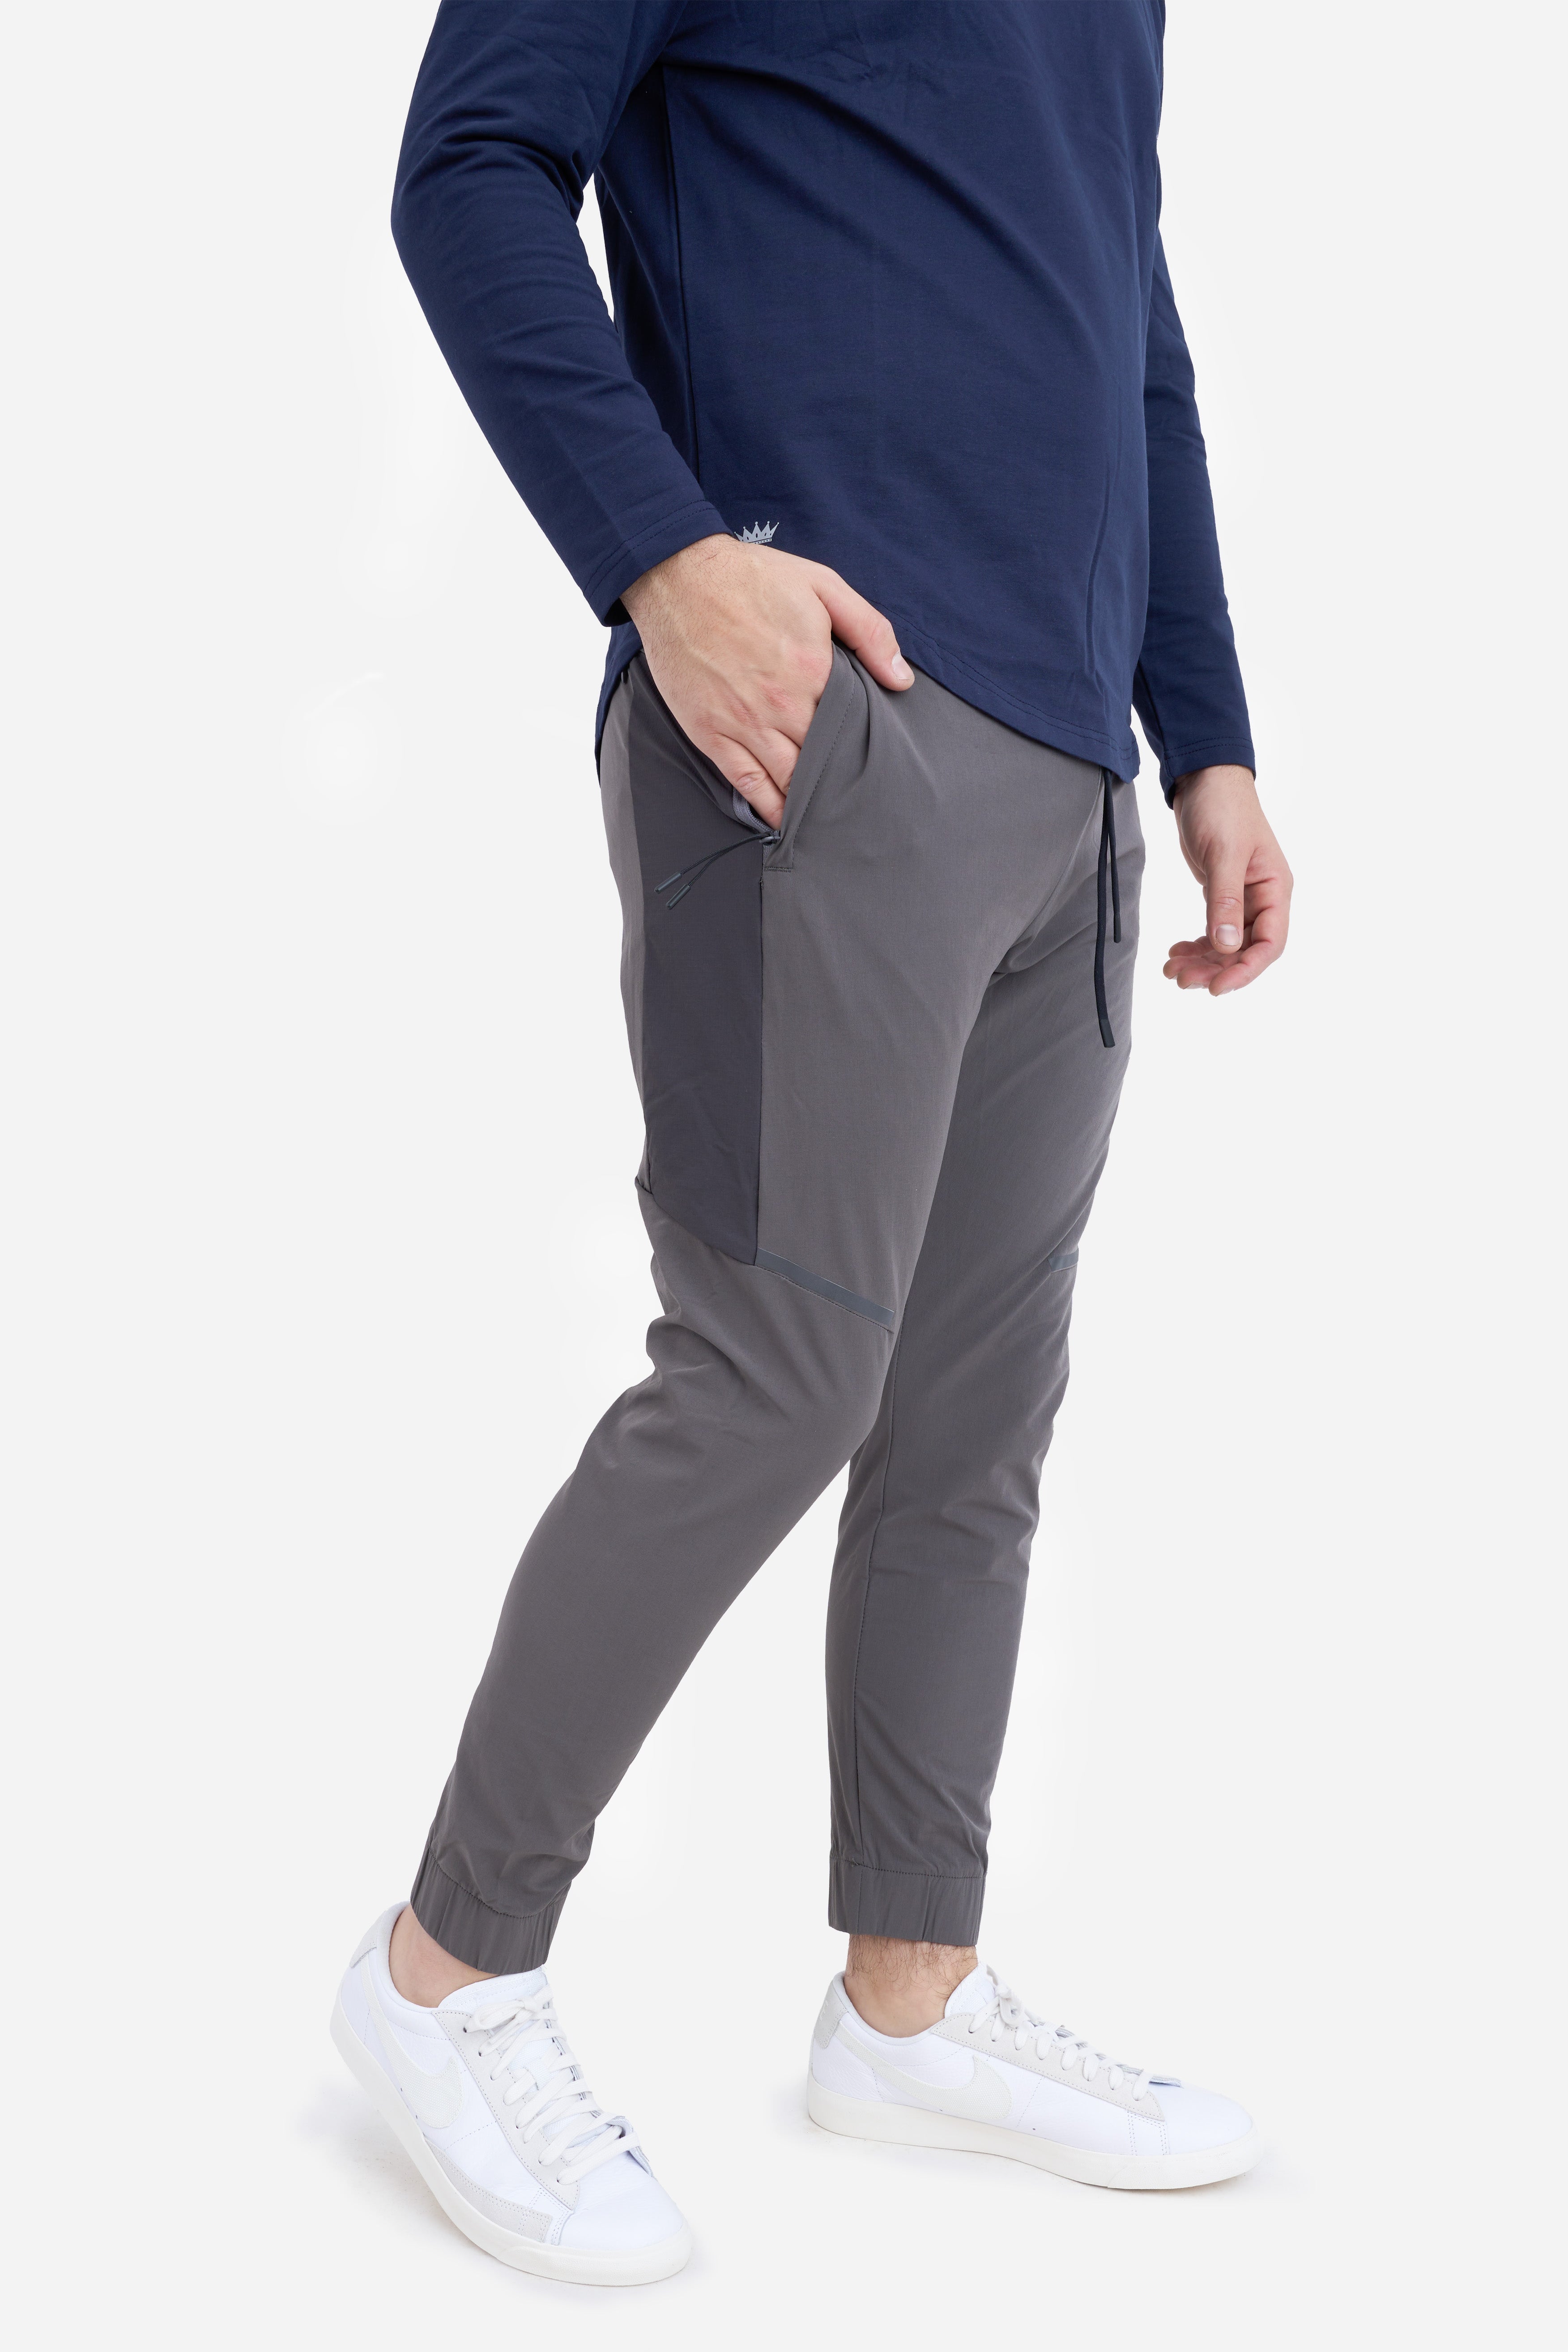 Tall Men's Sweatpants 36 inseam - 8 Options to Get you Started